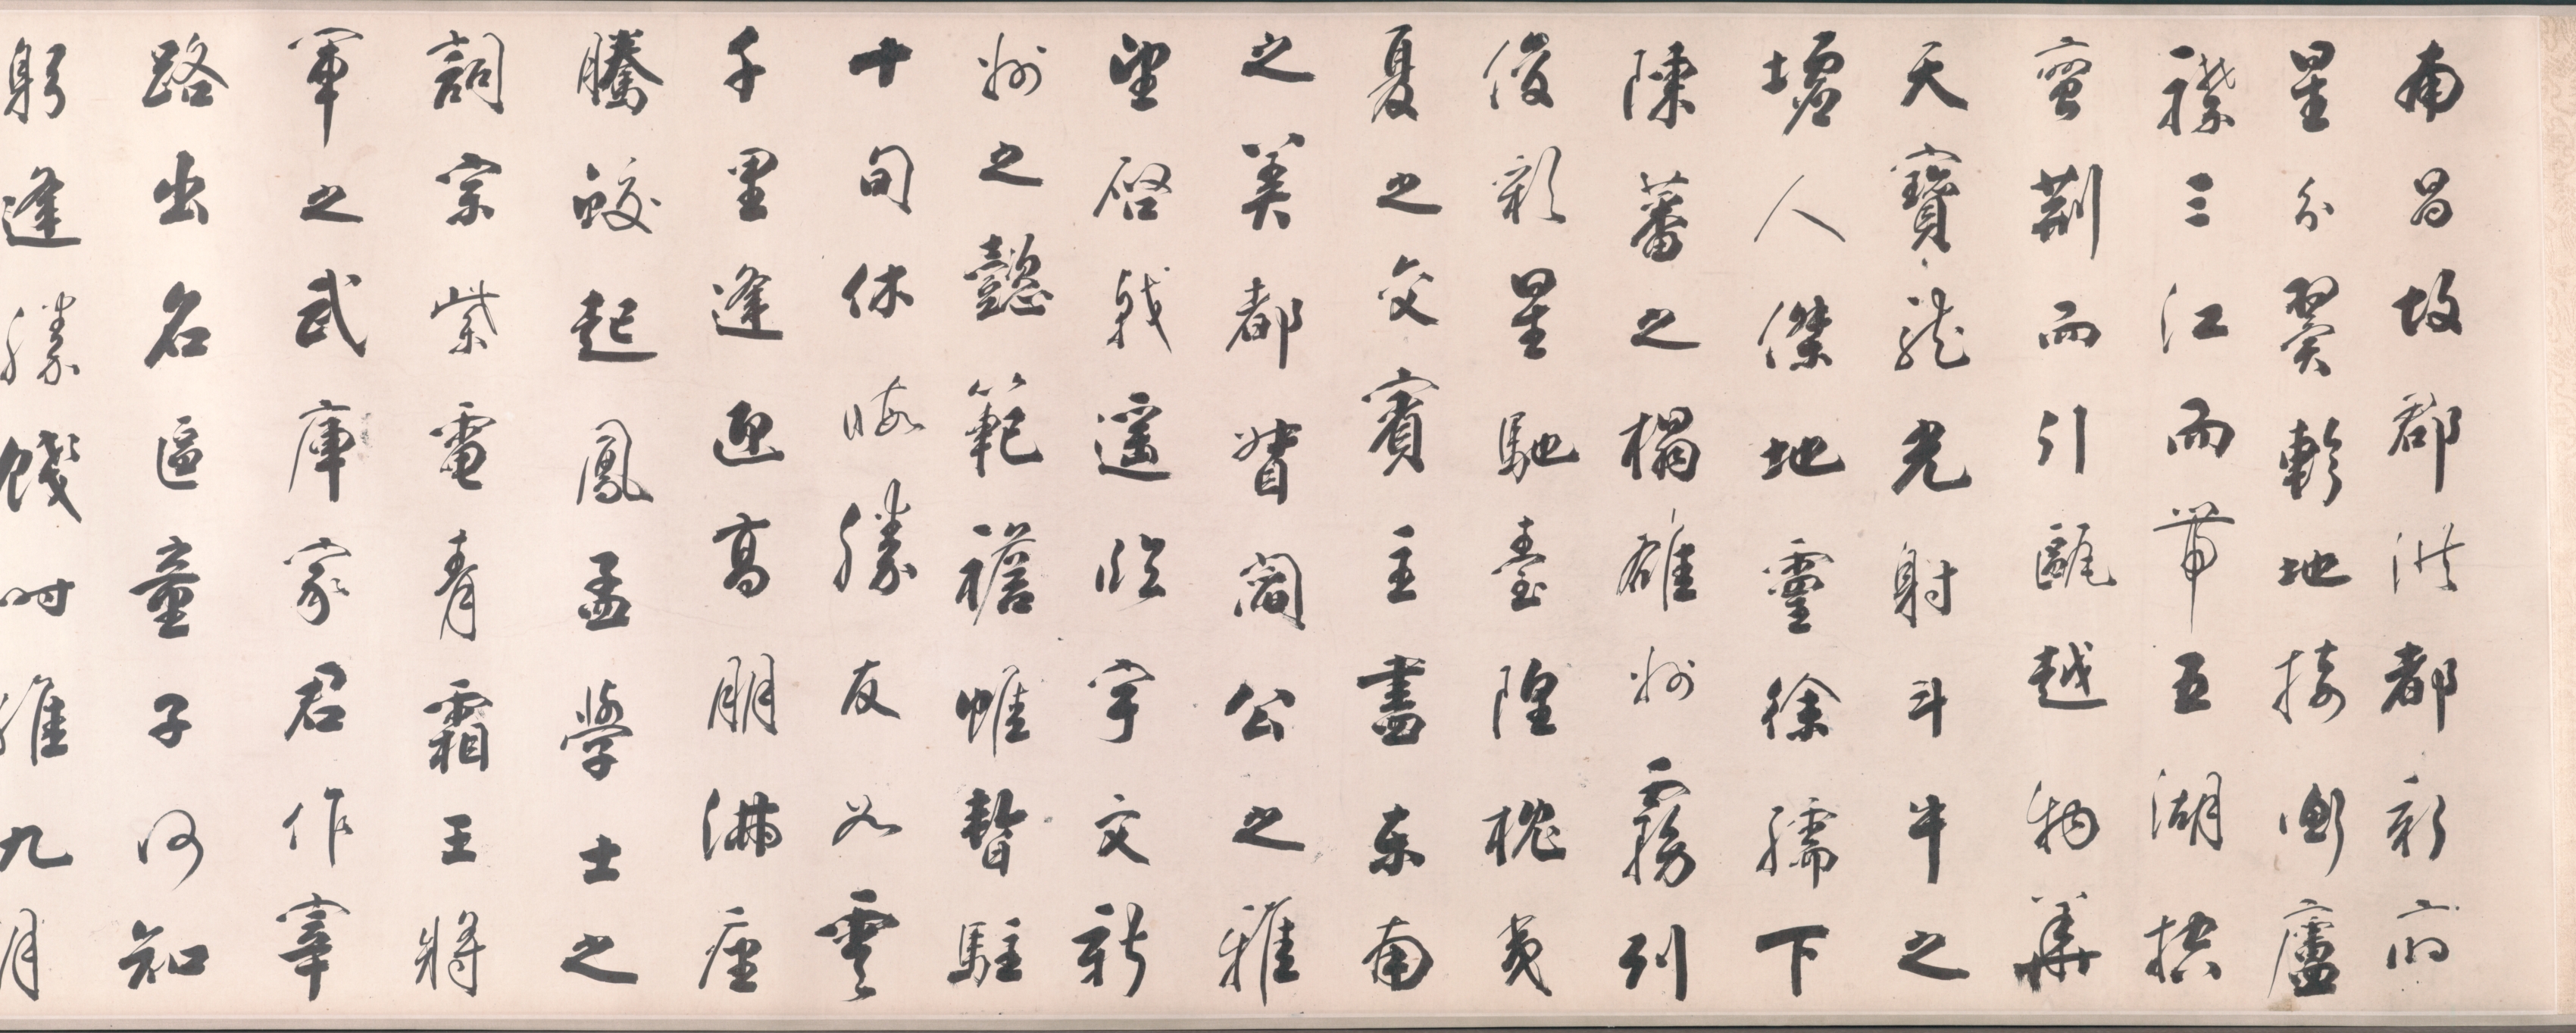 Calligraphy in Running Style based on Wang Bo's Essay on Tengwang Pavilion